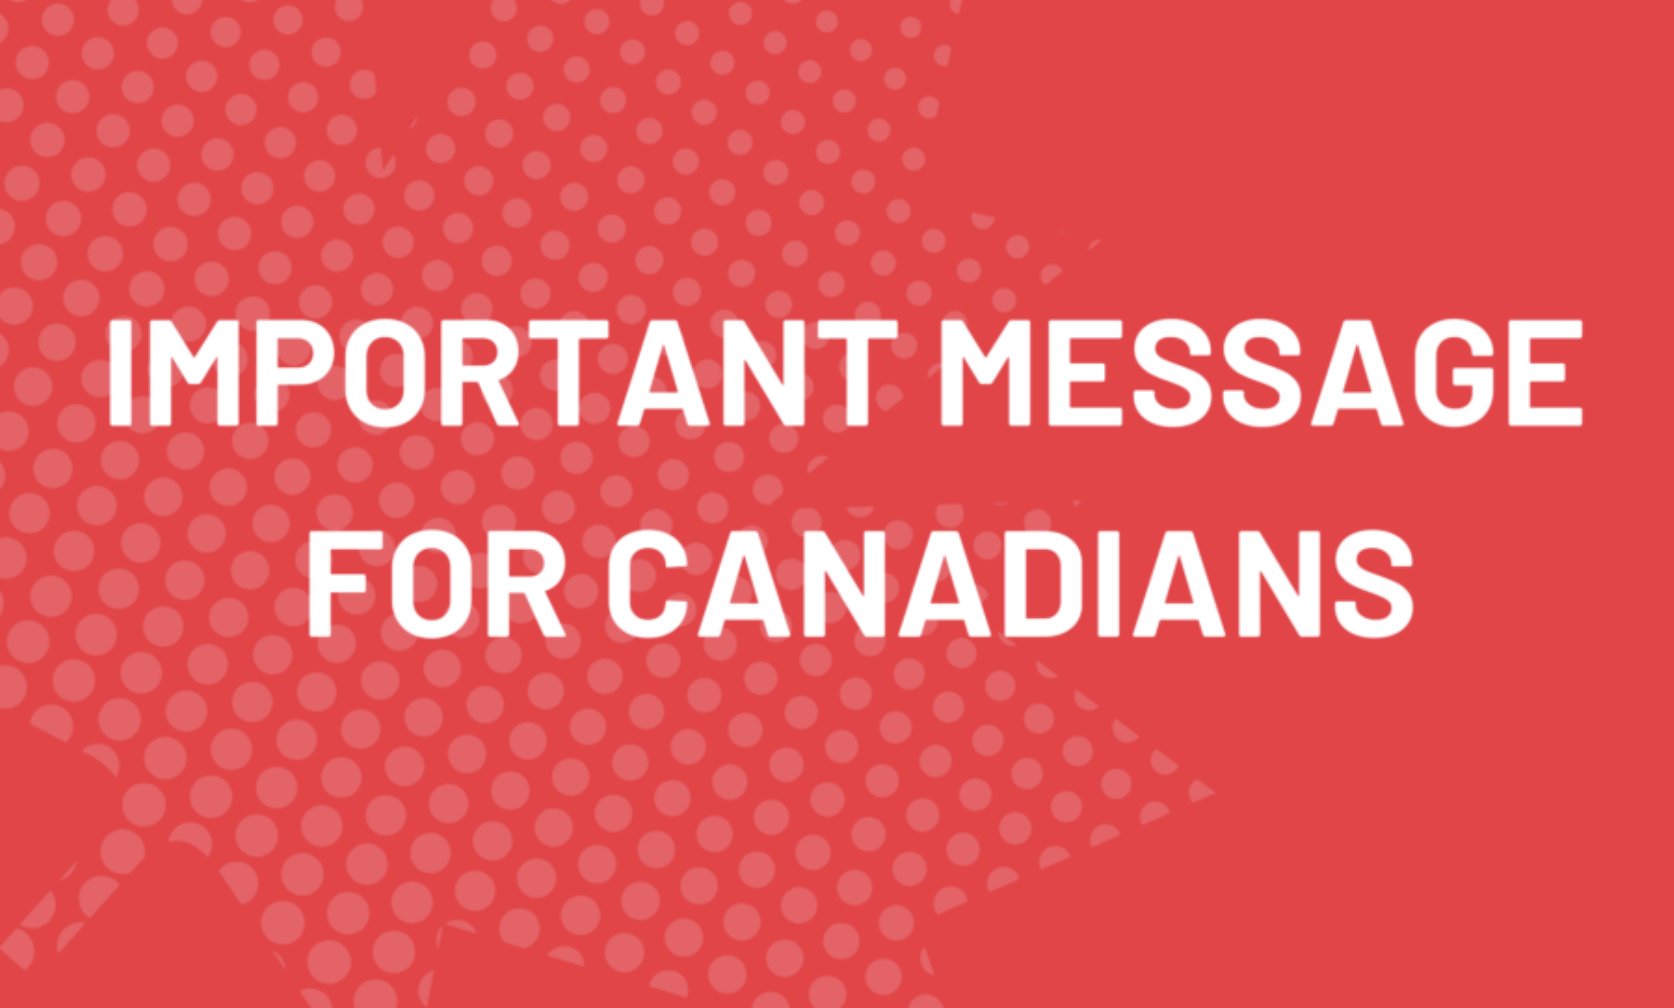 IMPORTANT MESSAGE
FOR CANADIANS